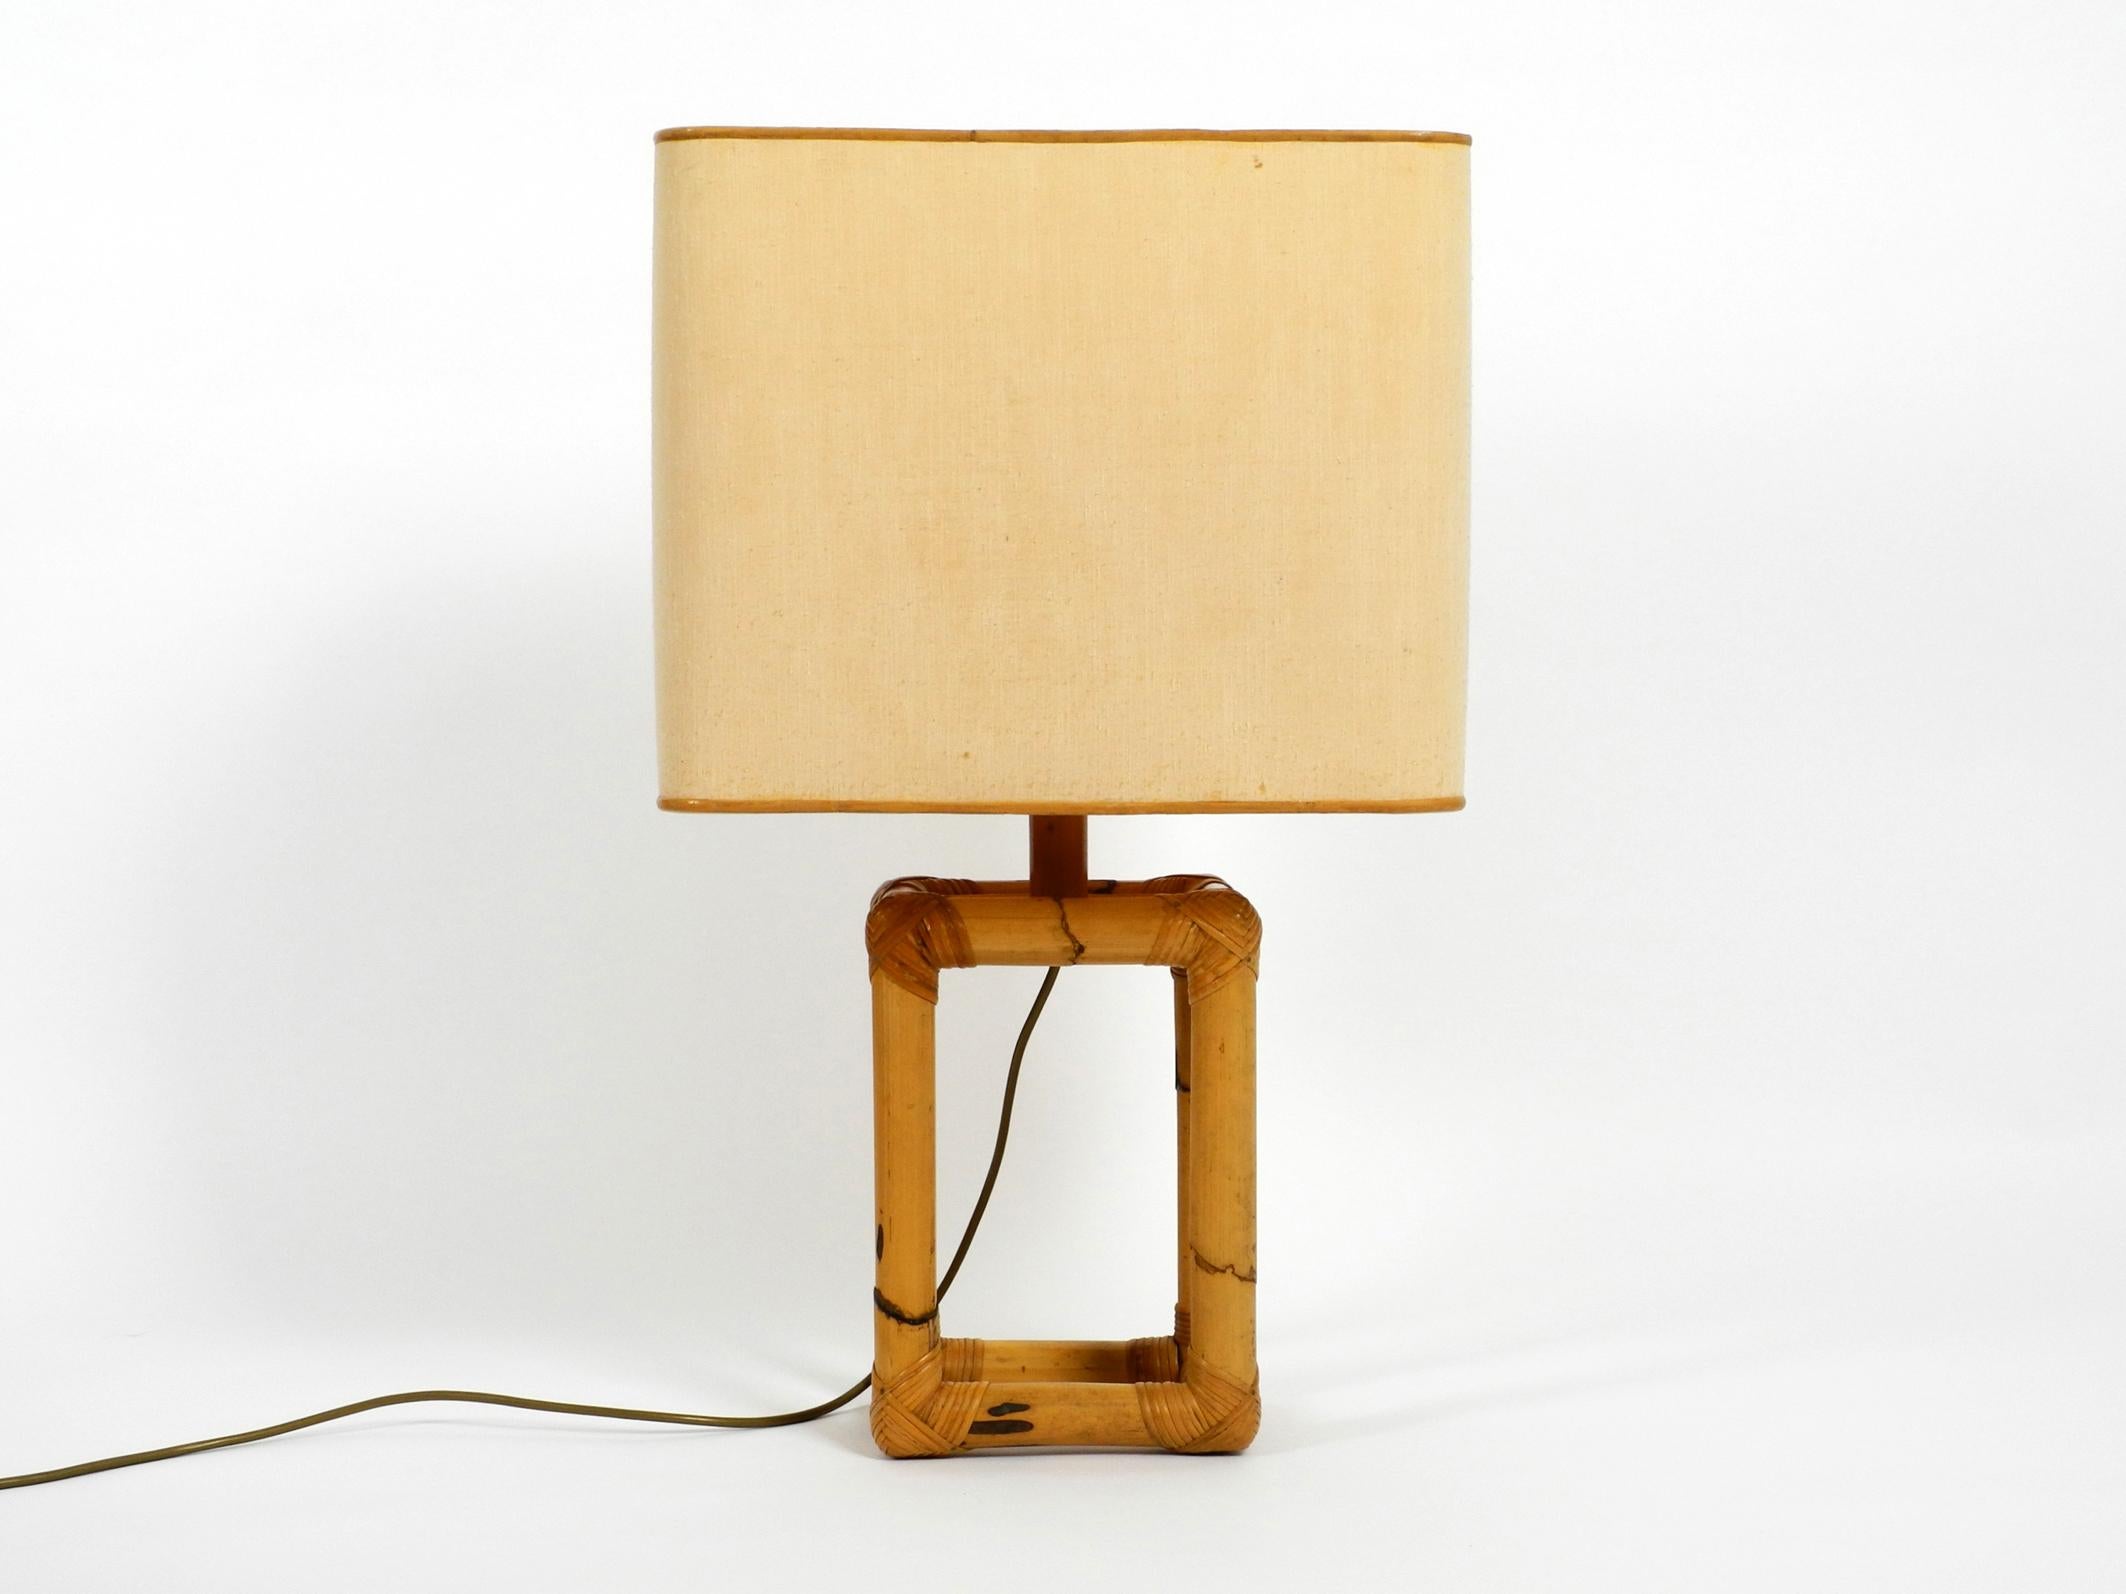 Extra large 1960s Minimalist bamboo table lamp with a large fabric shade.
Beautiful design from the 1960s. Presumably from an Italian production.
Frame made entirely of thick bamboo wood and bound with bamboo raffia.
Very good vintage condition